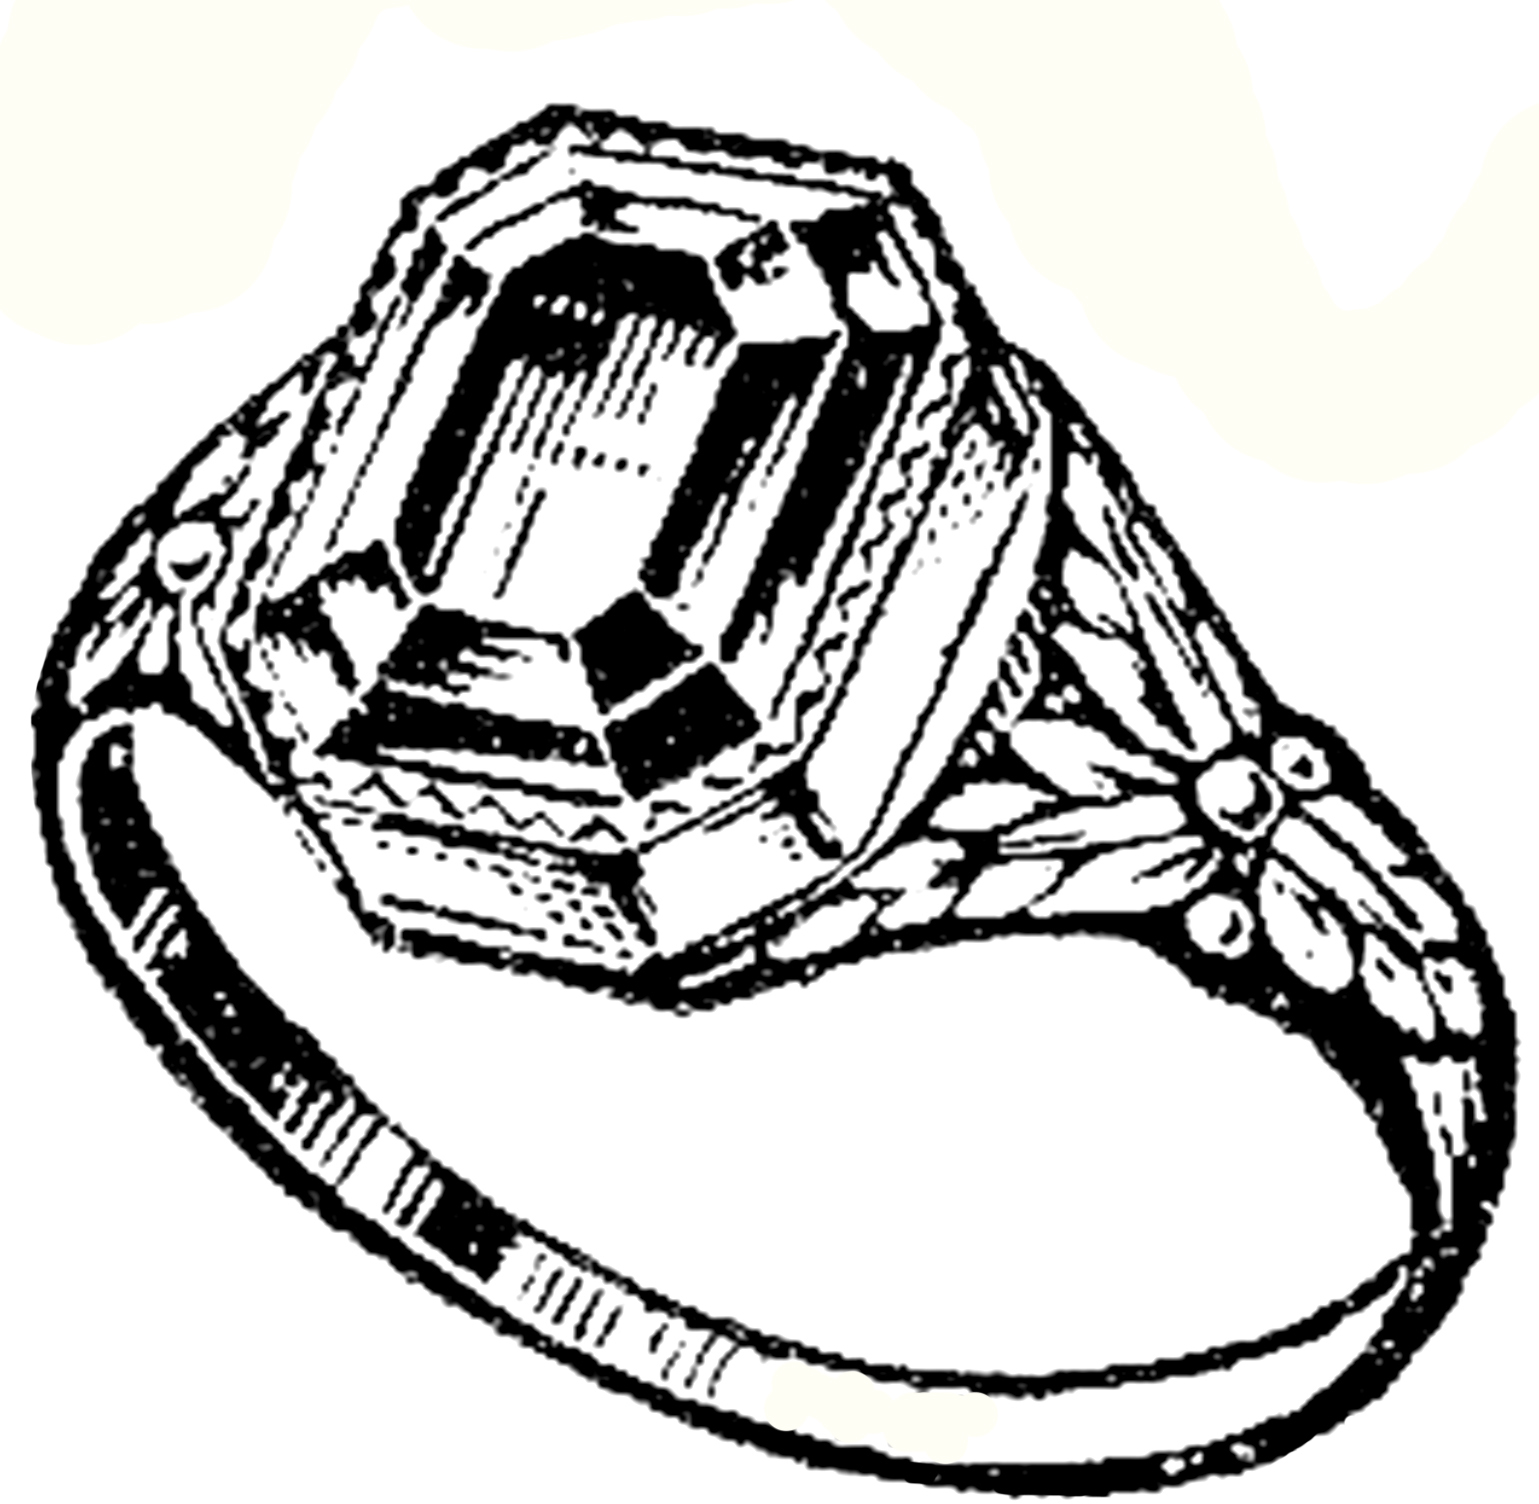  diamond ring images. Jewelry clipart antique jewelry